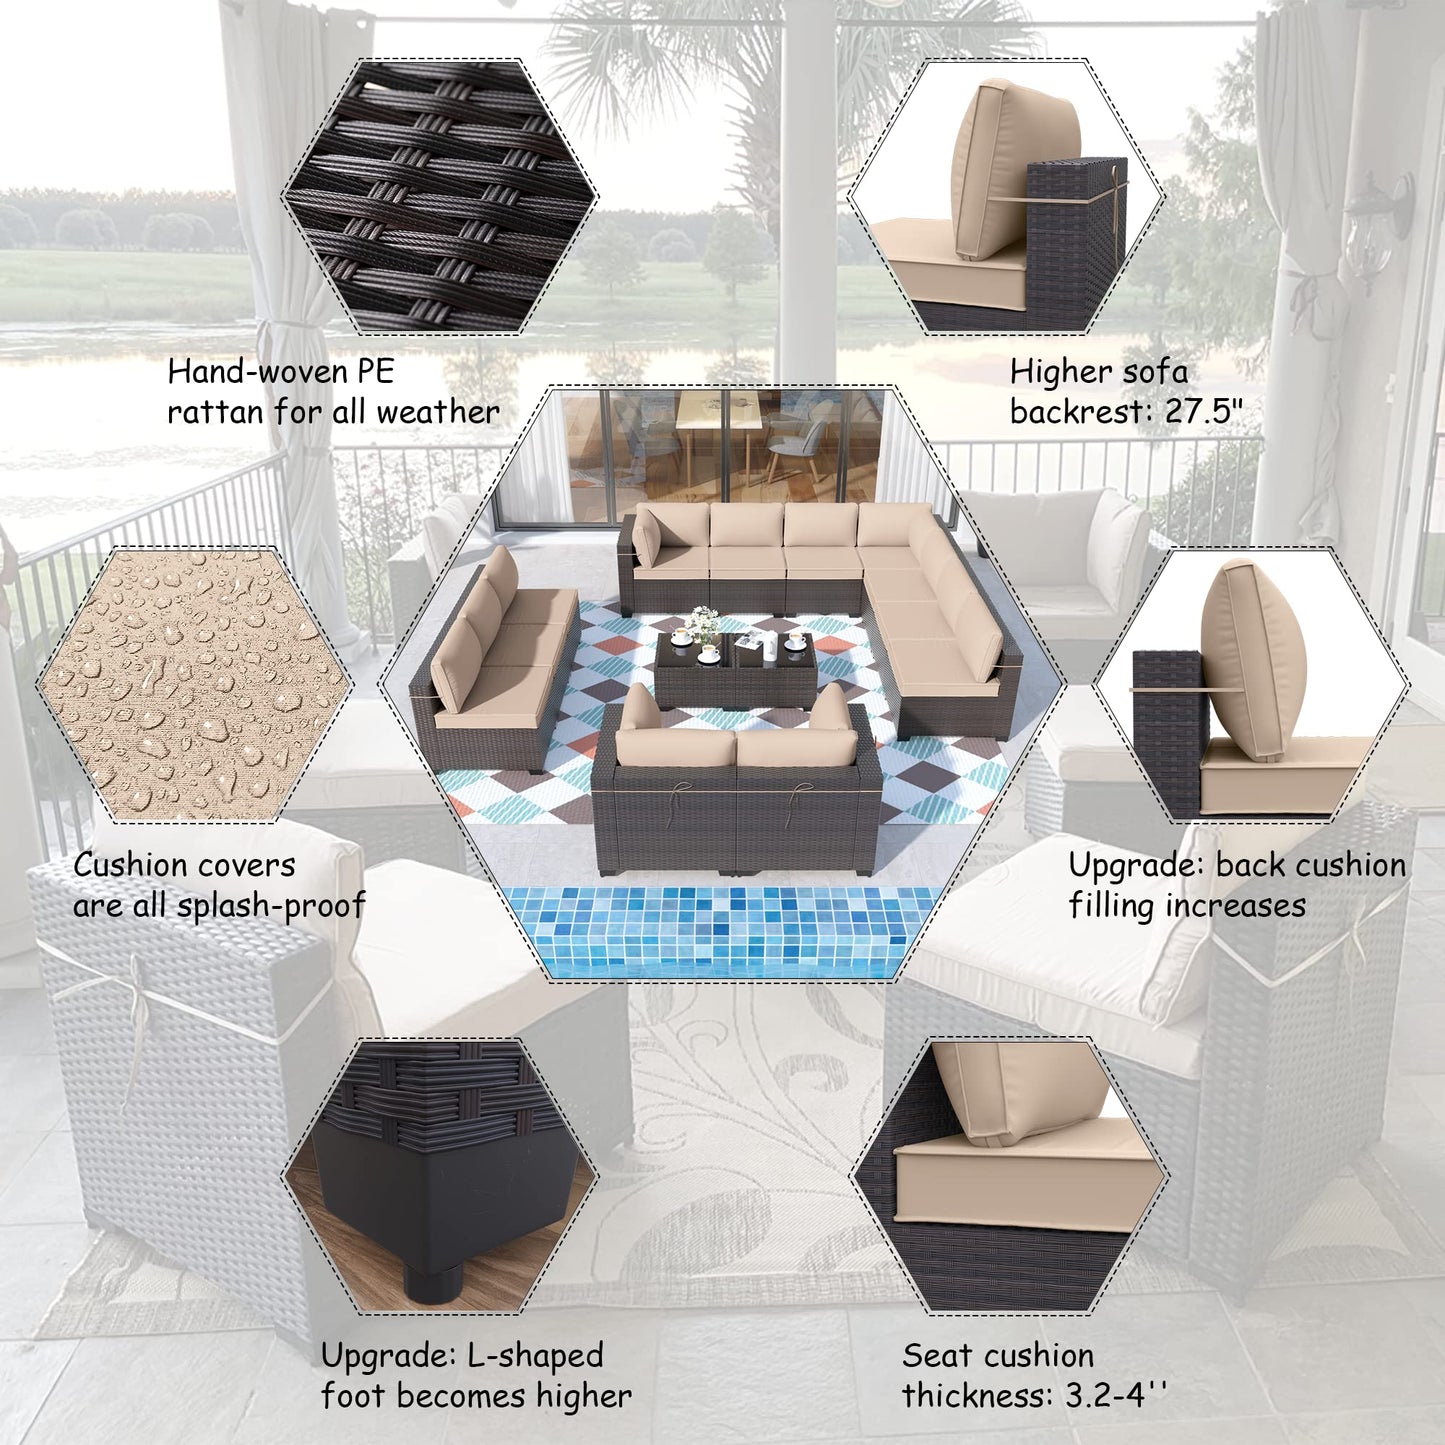 ALAULM 14 Pieces Sectional Outdoor Patio Furniture Sofa Sets - Sand